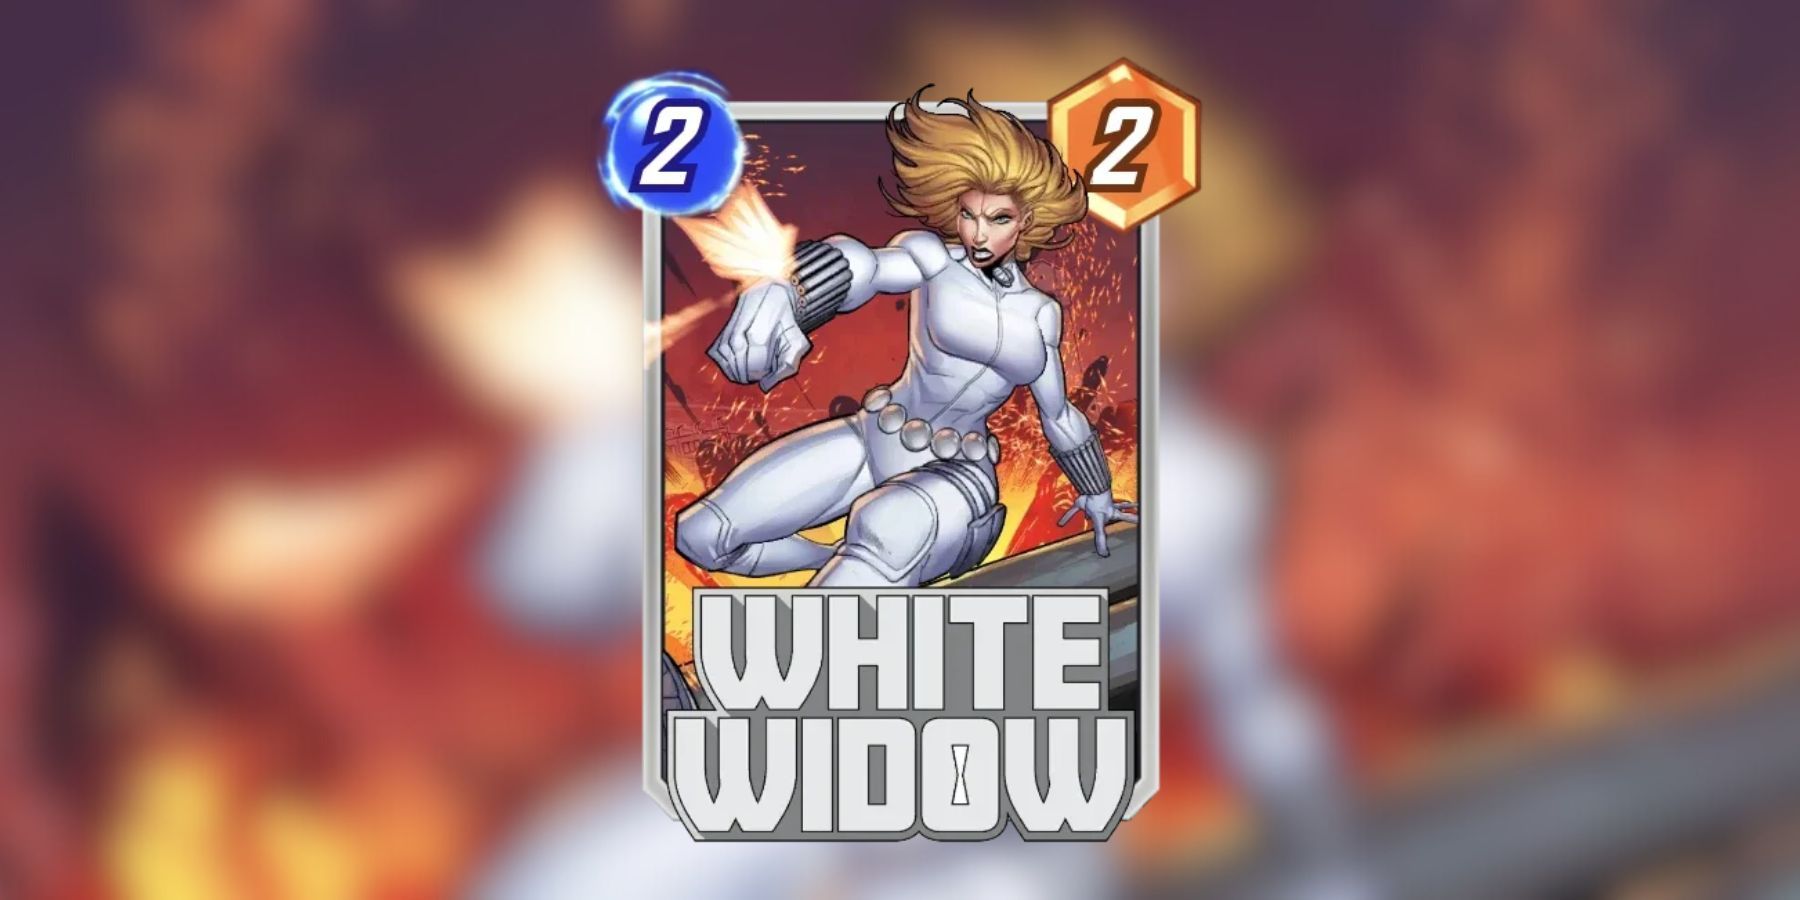 white widow’s card art in marvel snap.